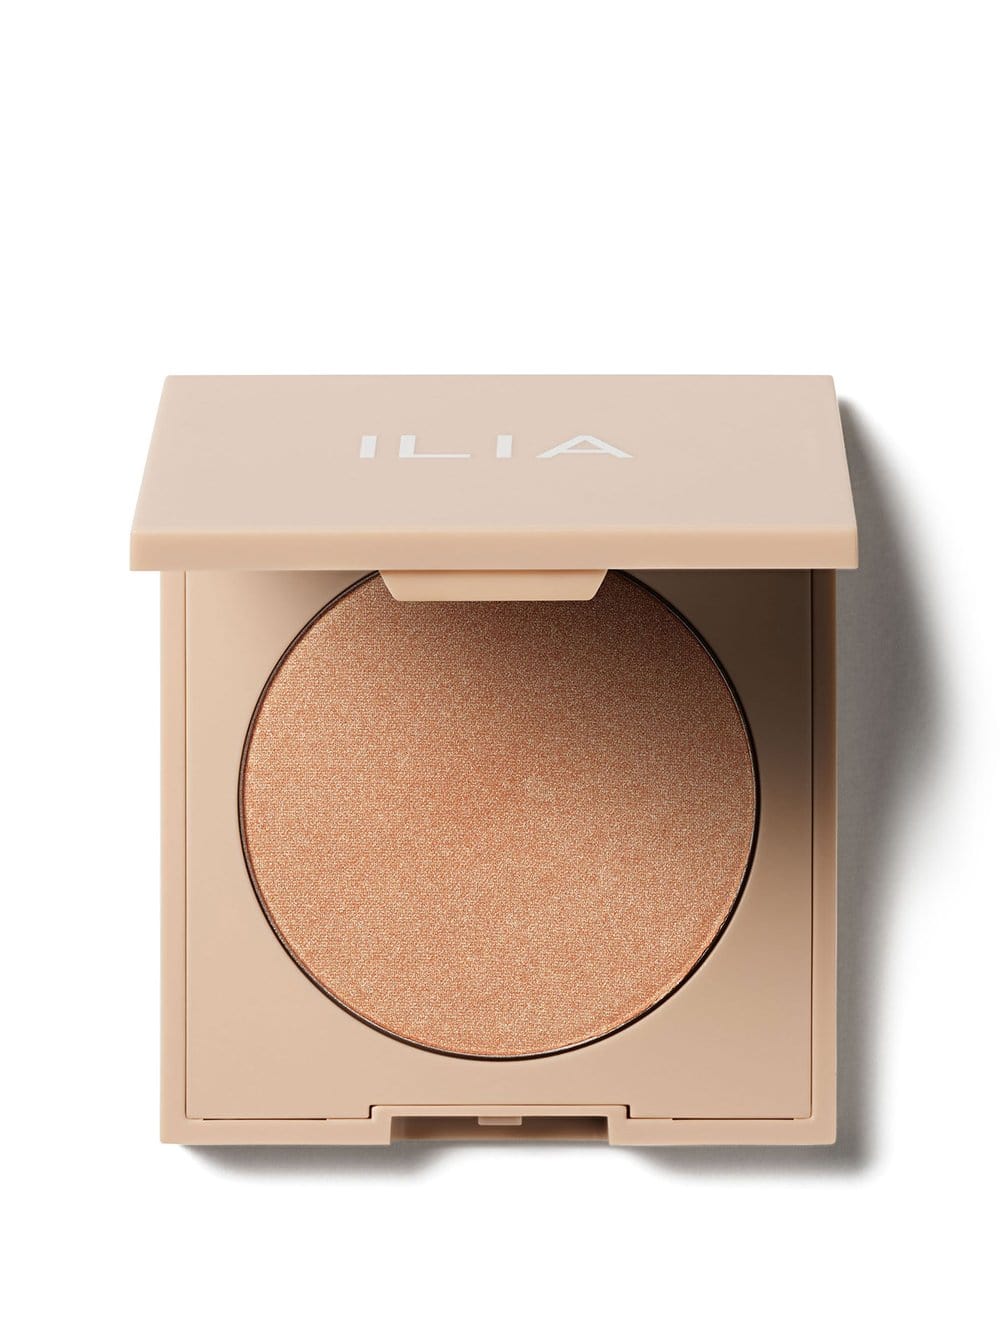 DayLite Highlighting Powder - The Natural Beauty Club